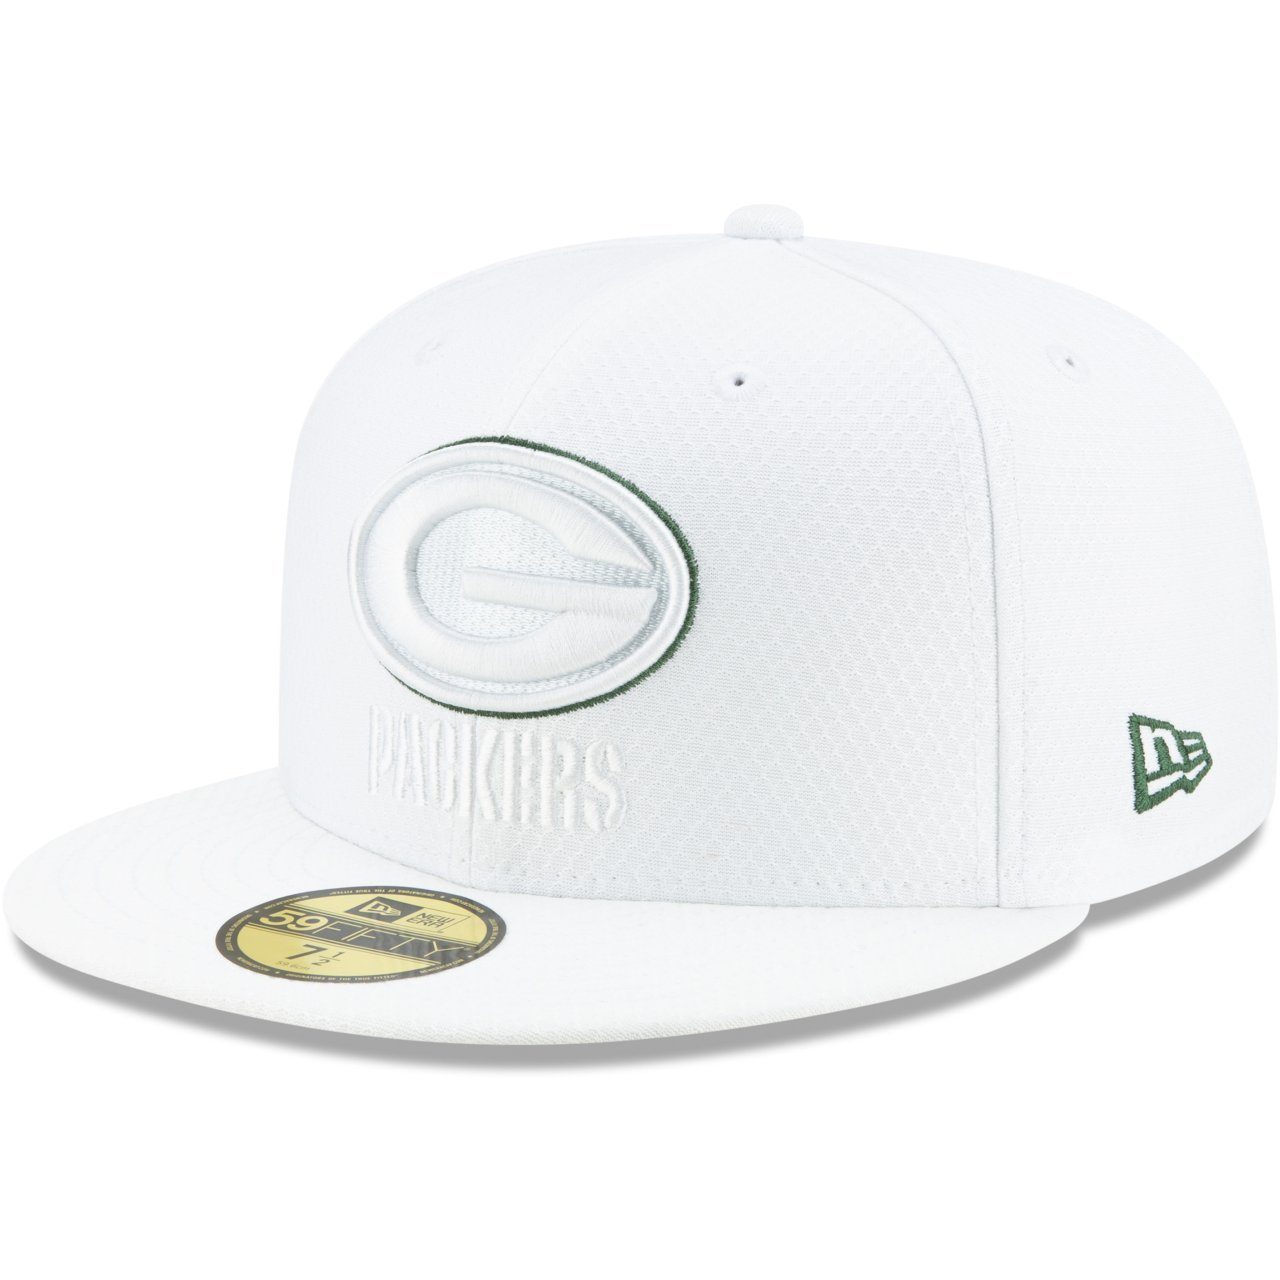 New Era Fitted Cap 59Fifty PLATINUM NFL Sideline Green Bay Packers